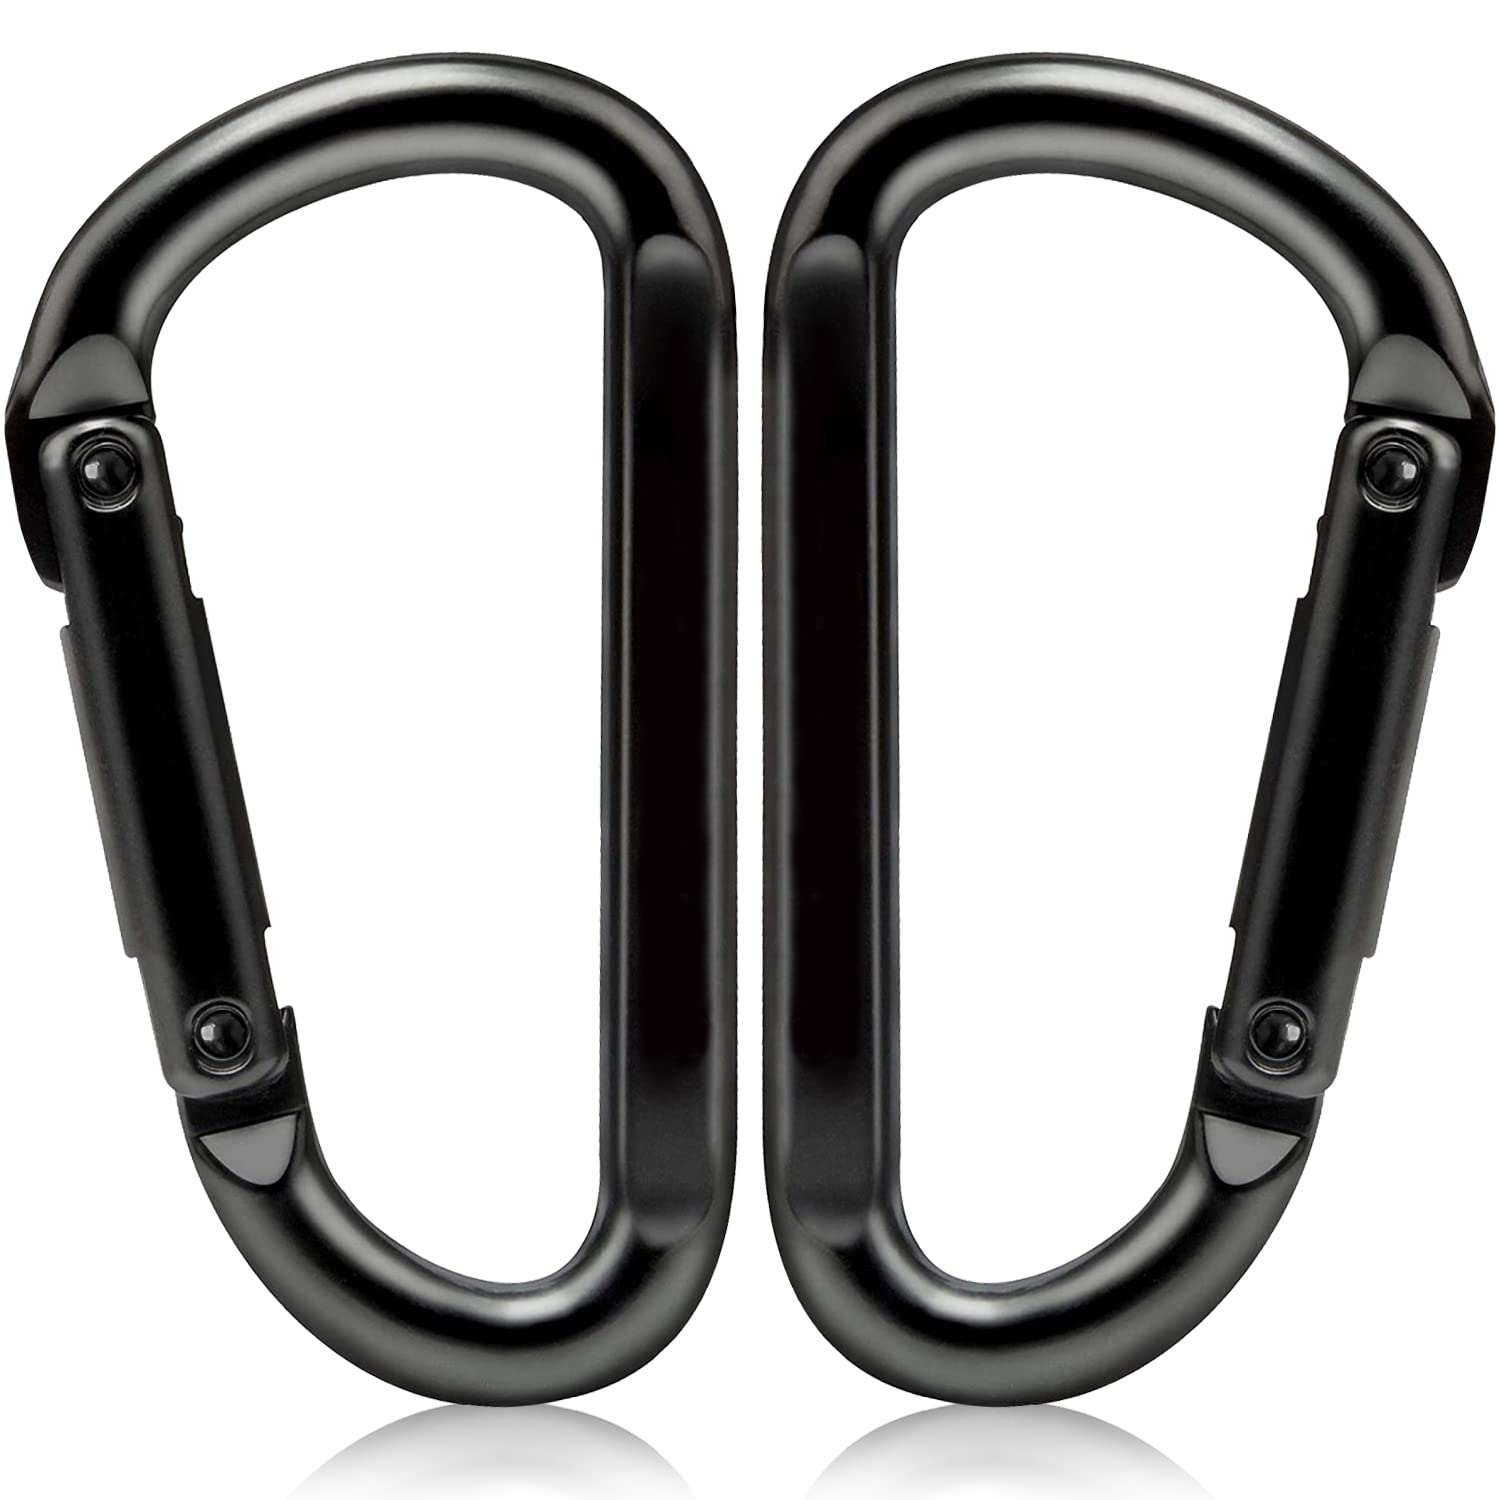 Caribeener Carabiner Clip, 860lbs, 3 Iron Heavy Duty Carabiner, D Shape  Buckle - Keychains, Camping, Hiking Accessories, Carabiners for Locking Dog  Leash, Harness, Yoga Swing, Gym etc, Black, 2 PCS